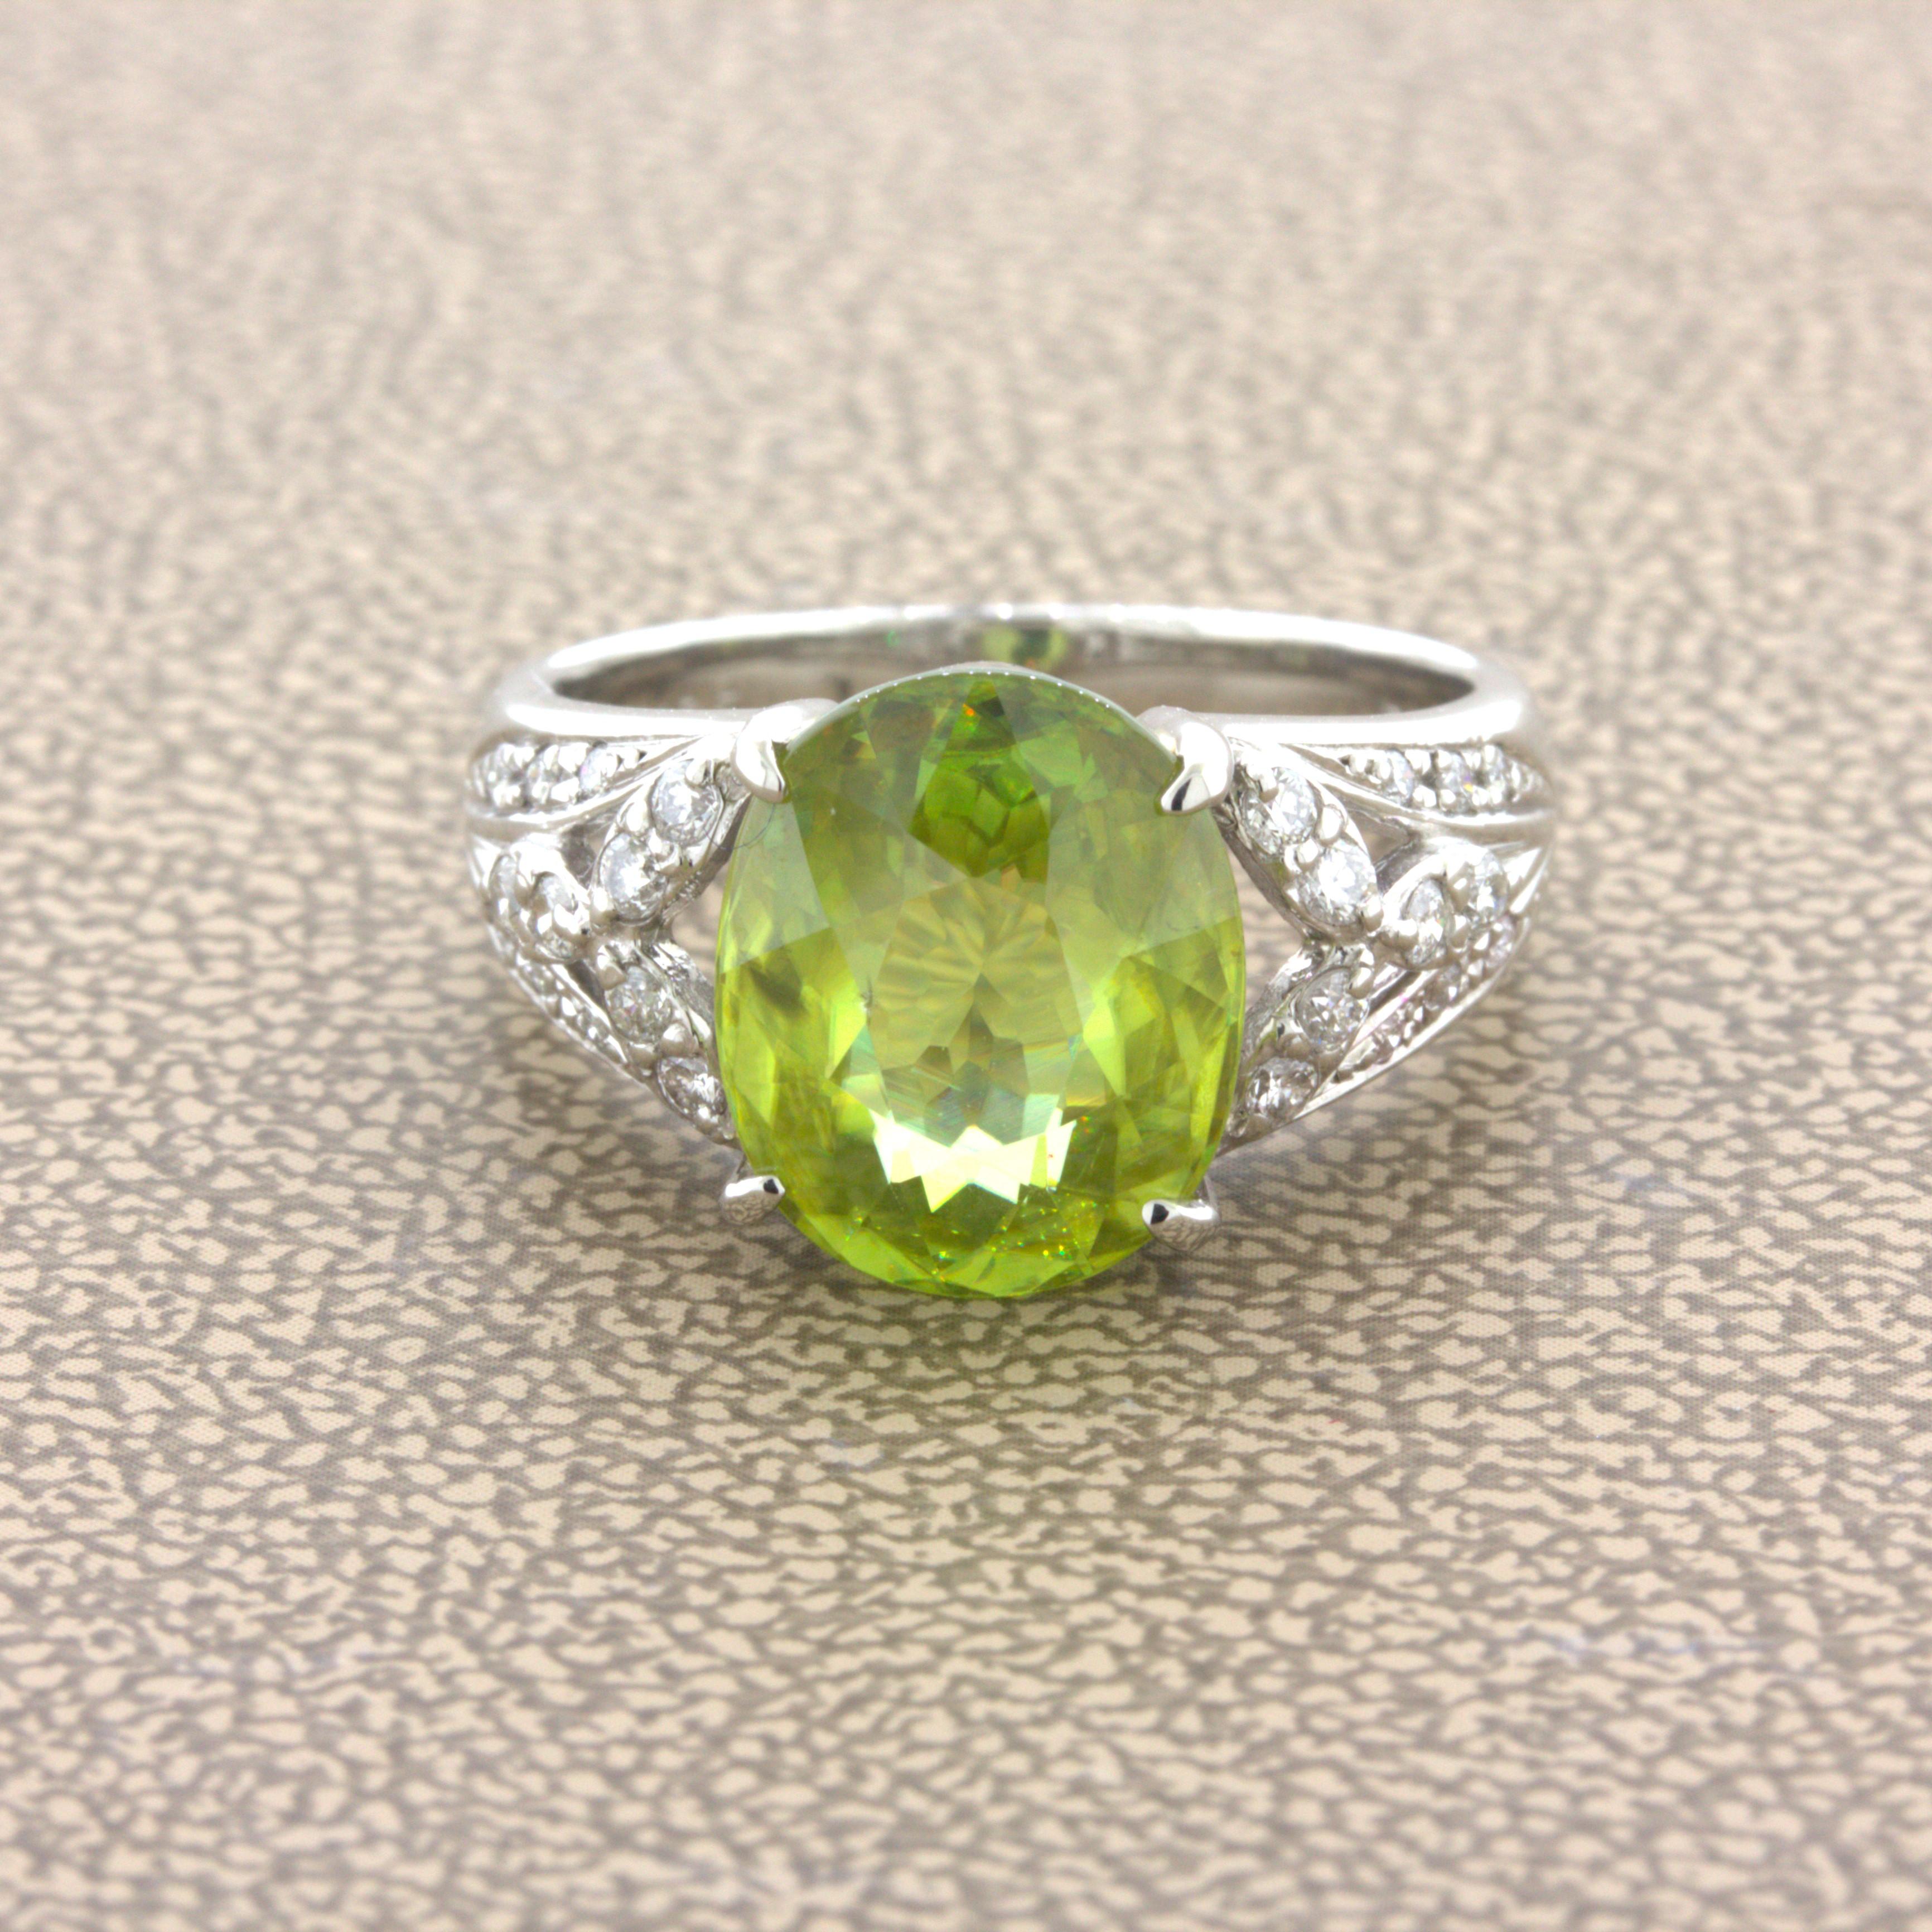 A chic and elegant platinum ring featuring a fine natural sphene. It weighs 4.85 carats and has a bright green body color along with intense fire and brilliance (more than diamond). An array of colors, red, green, blue, yellow, and more can be seen